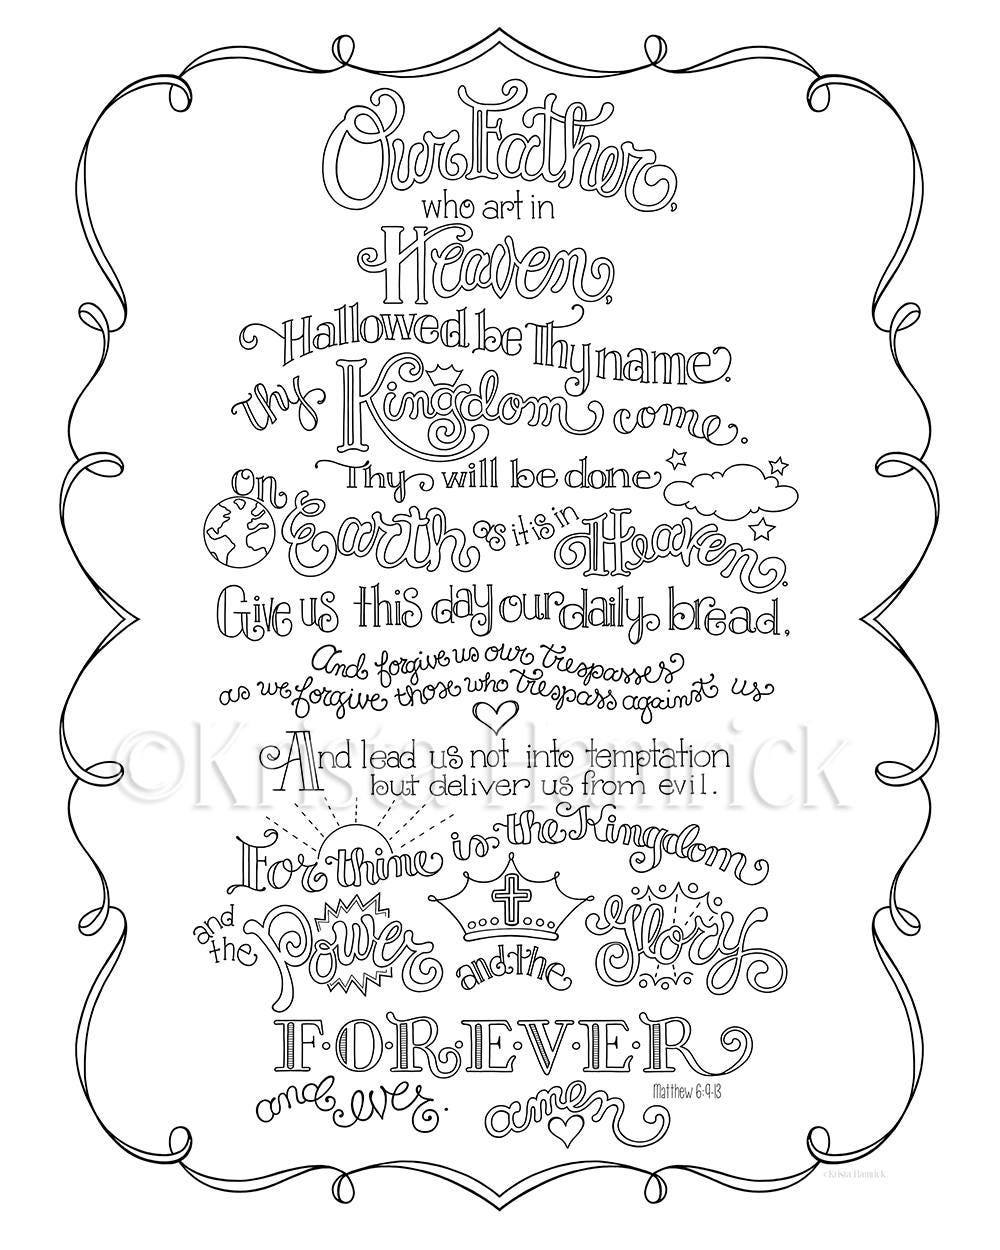 Lord's Prayer bulletin insers. Free printable coloring pages and